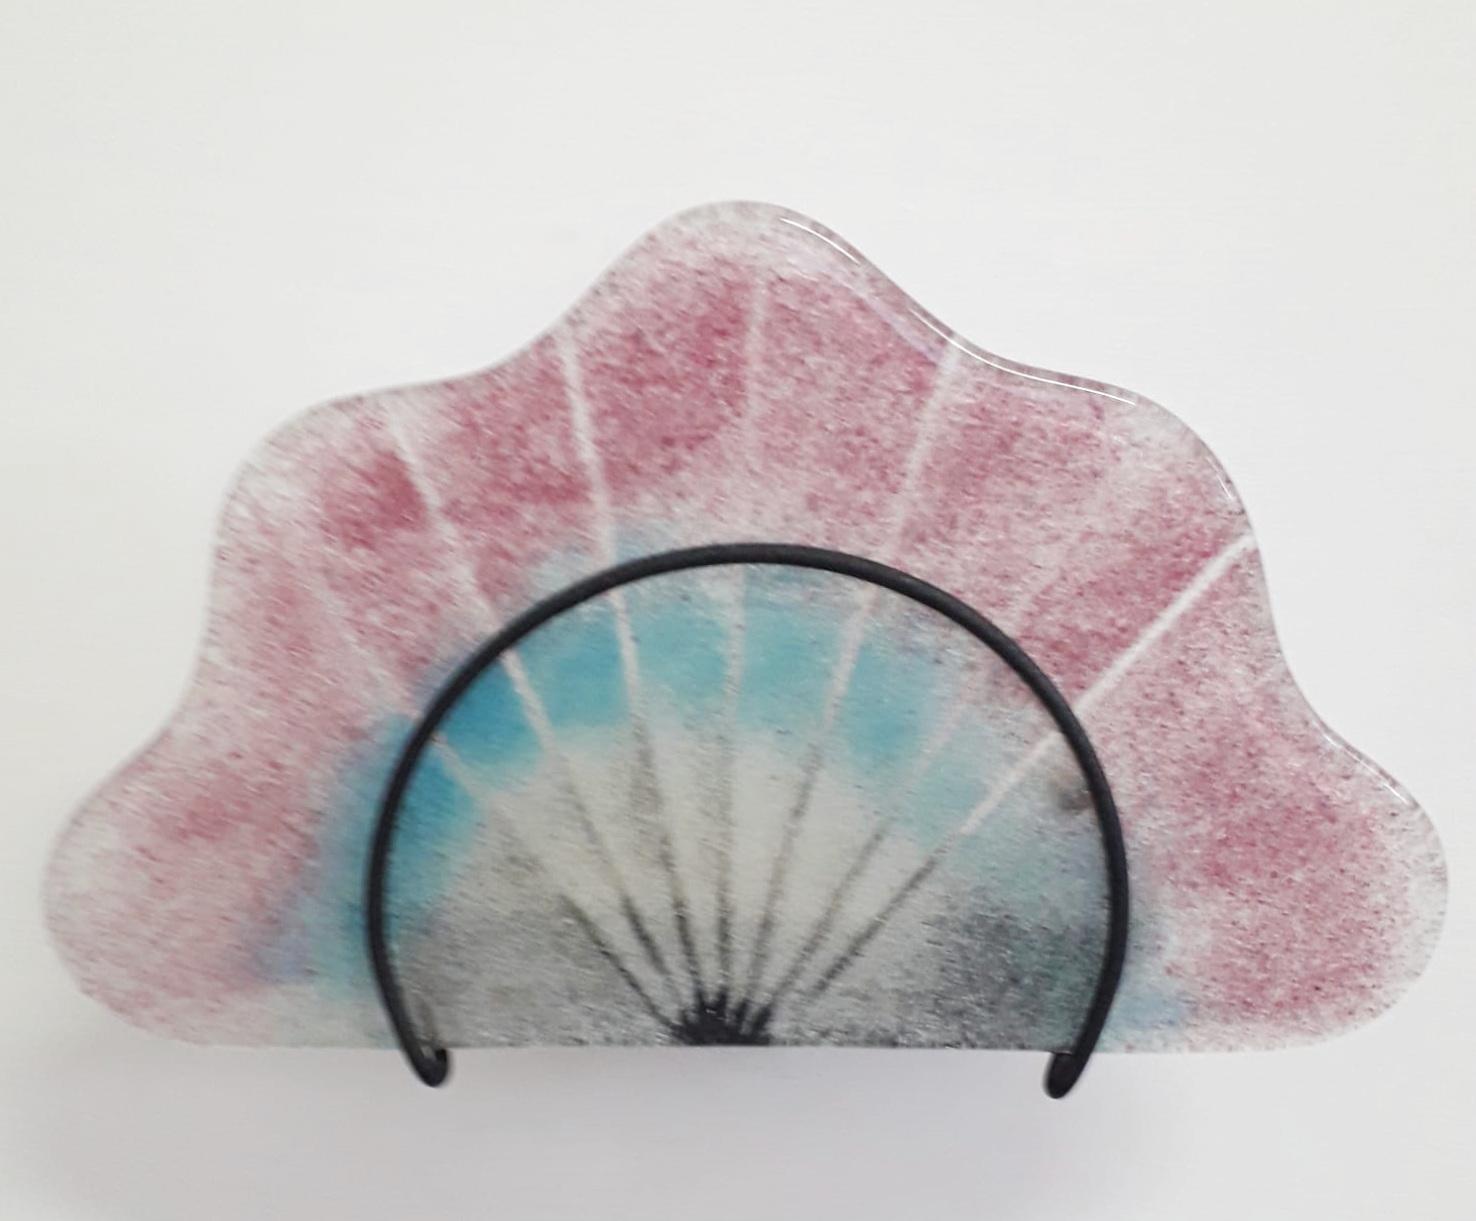 Vintage Italian wall lights with fan shaped Murano glass diffusers in clear, blue and pink colors on black metal frames / Made in Italy circa 1960s
Measures: height 9 inches, width 14.5 inches, depth 5.5 inches
1 light / E12 or E14 type / max 40W